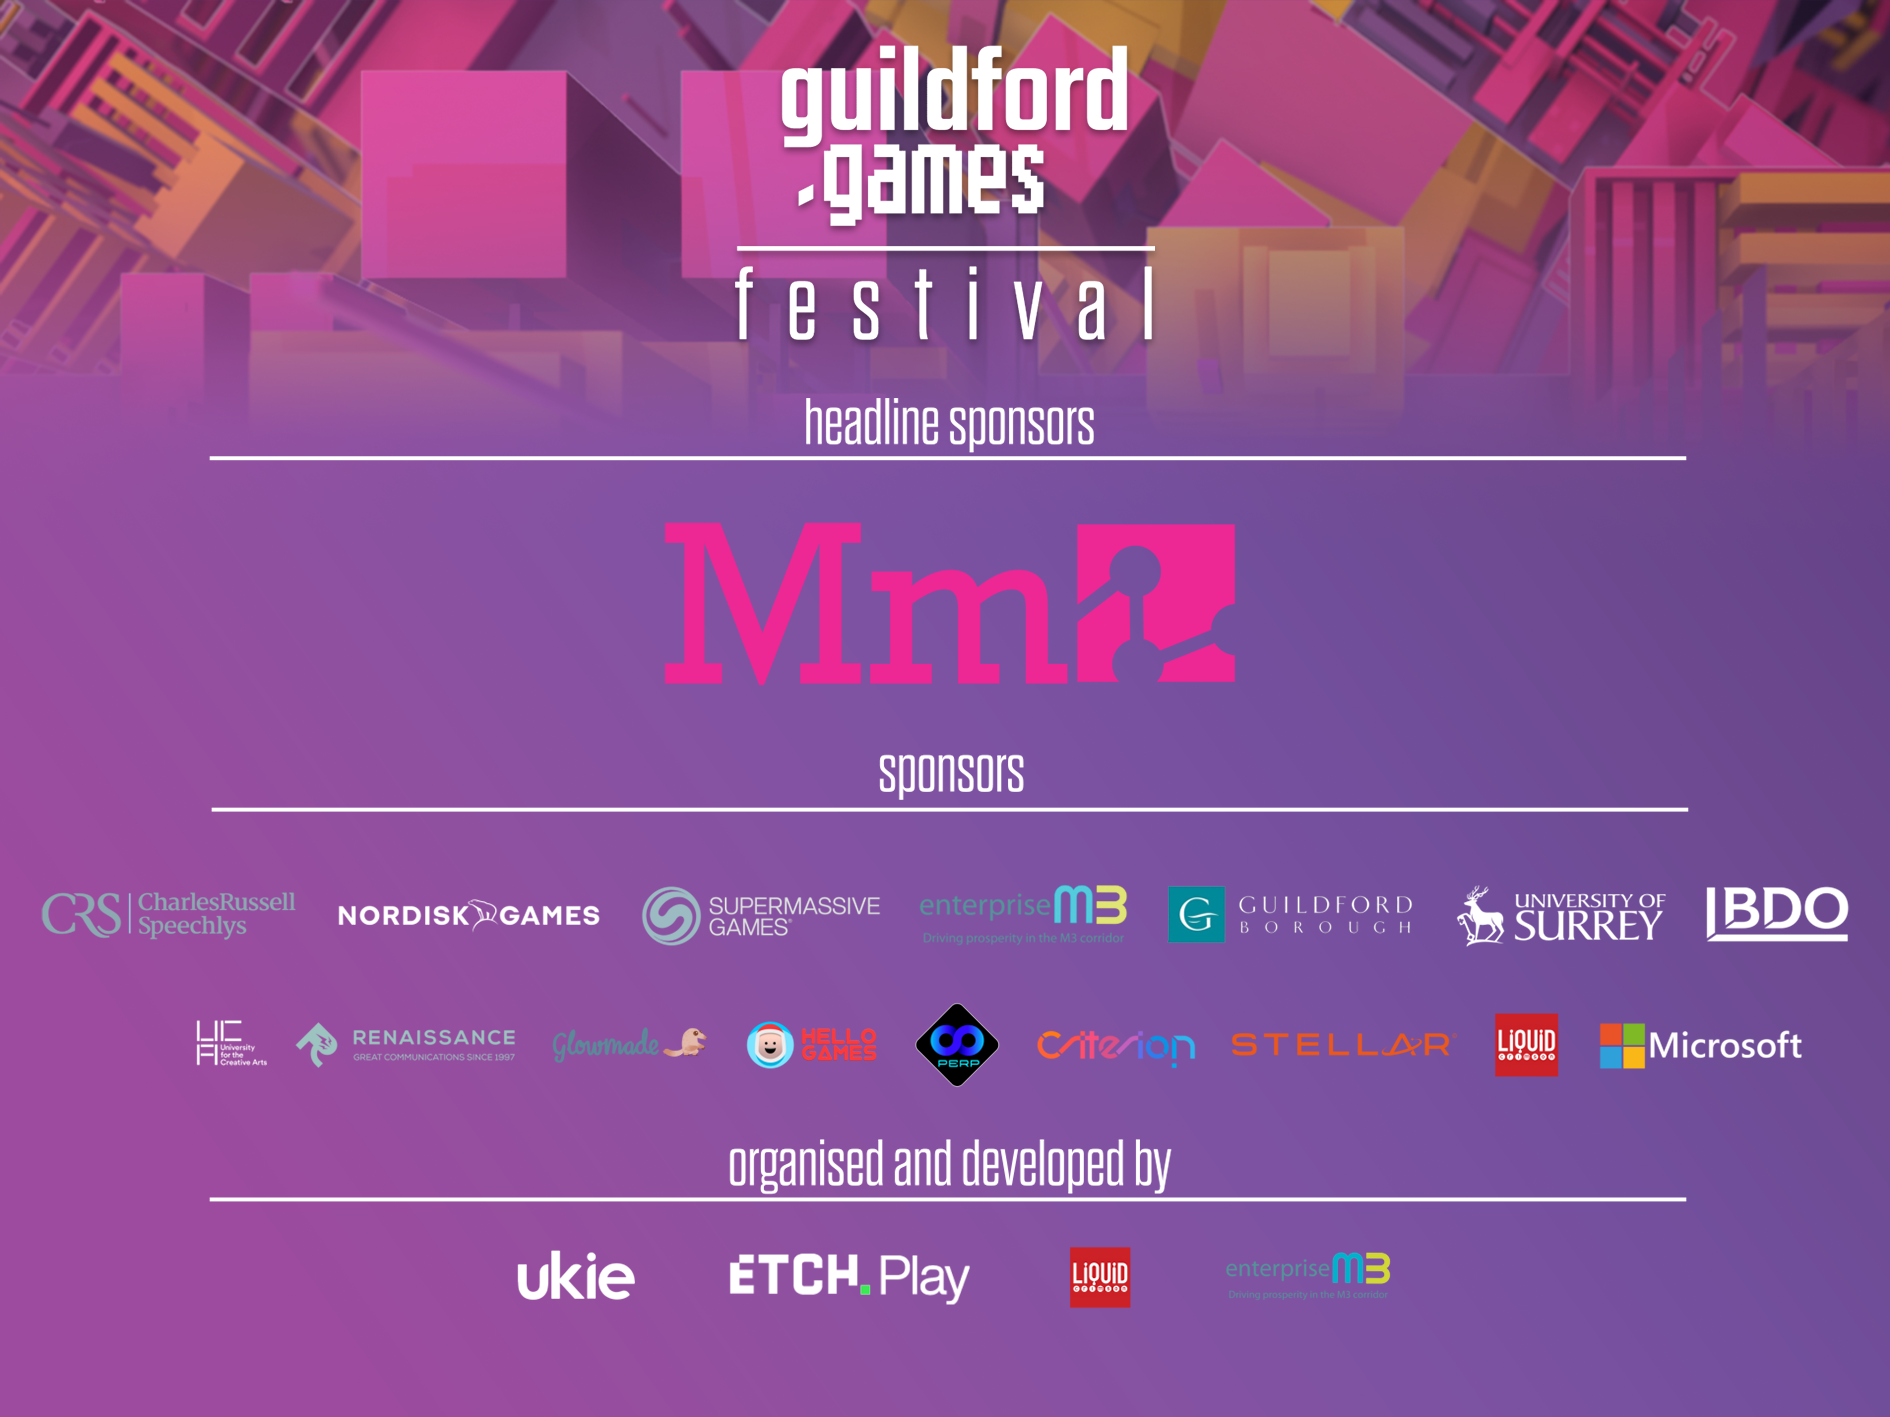 Games Festival Schedules - Guildford Games